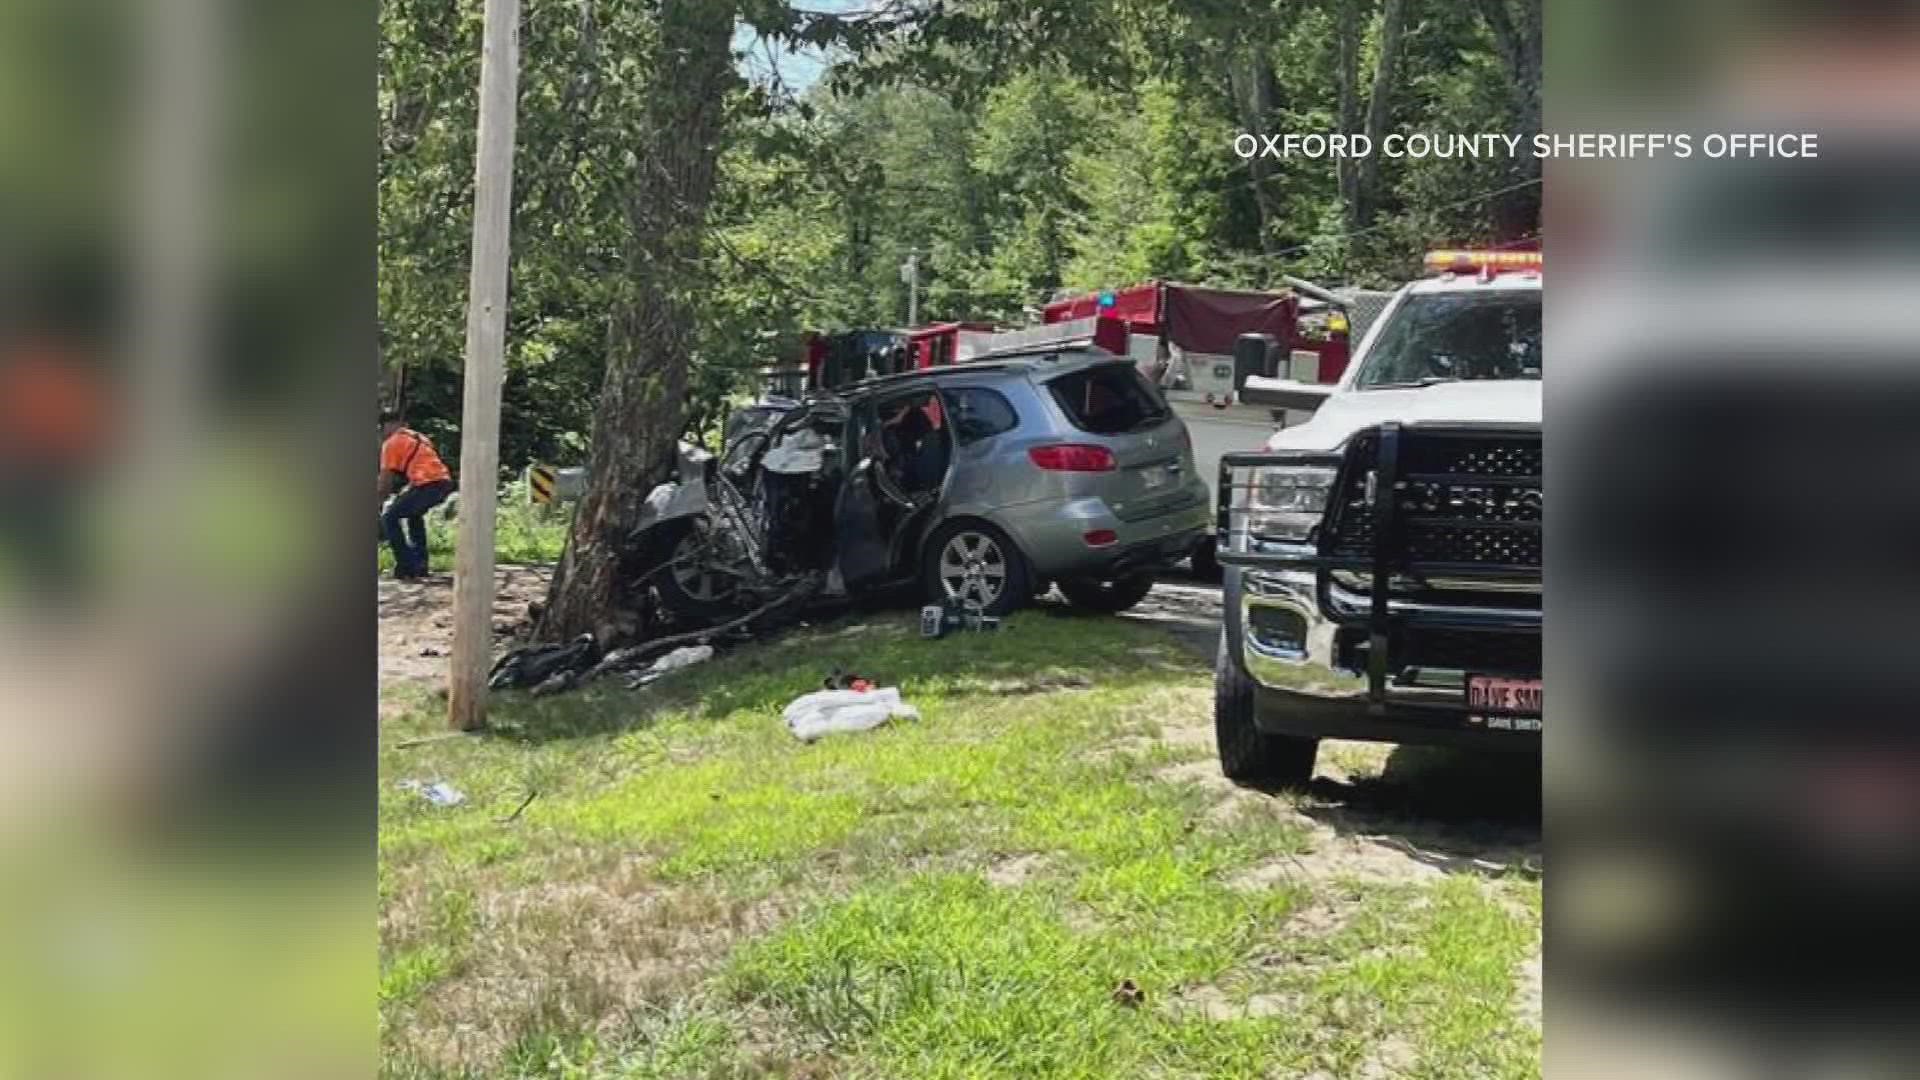 The driver, 32-year-old Mark MacKerron of Lewiston, was flown by helicopter to Central Maine Medical Center, where he later died from his injuries.